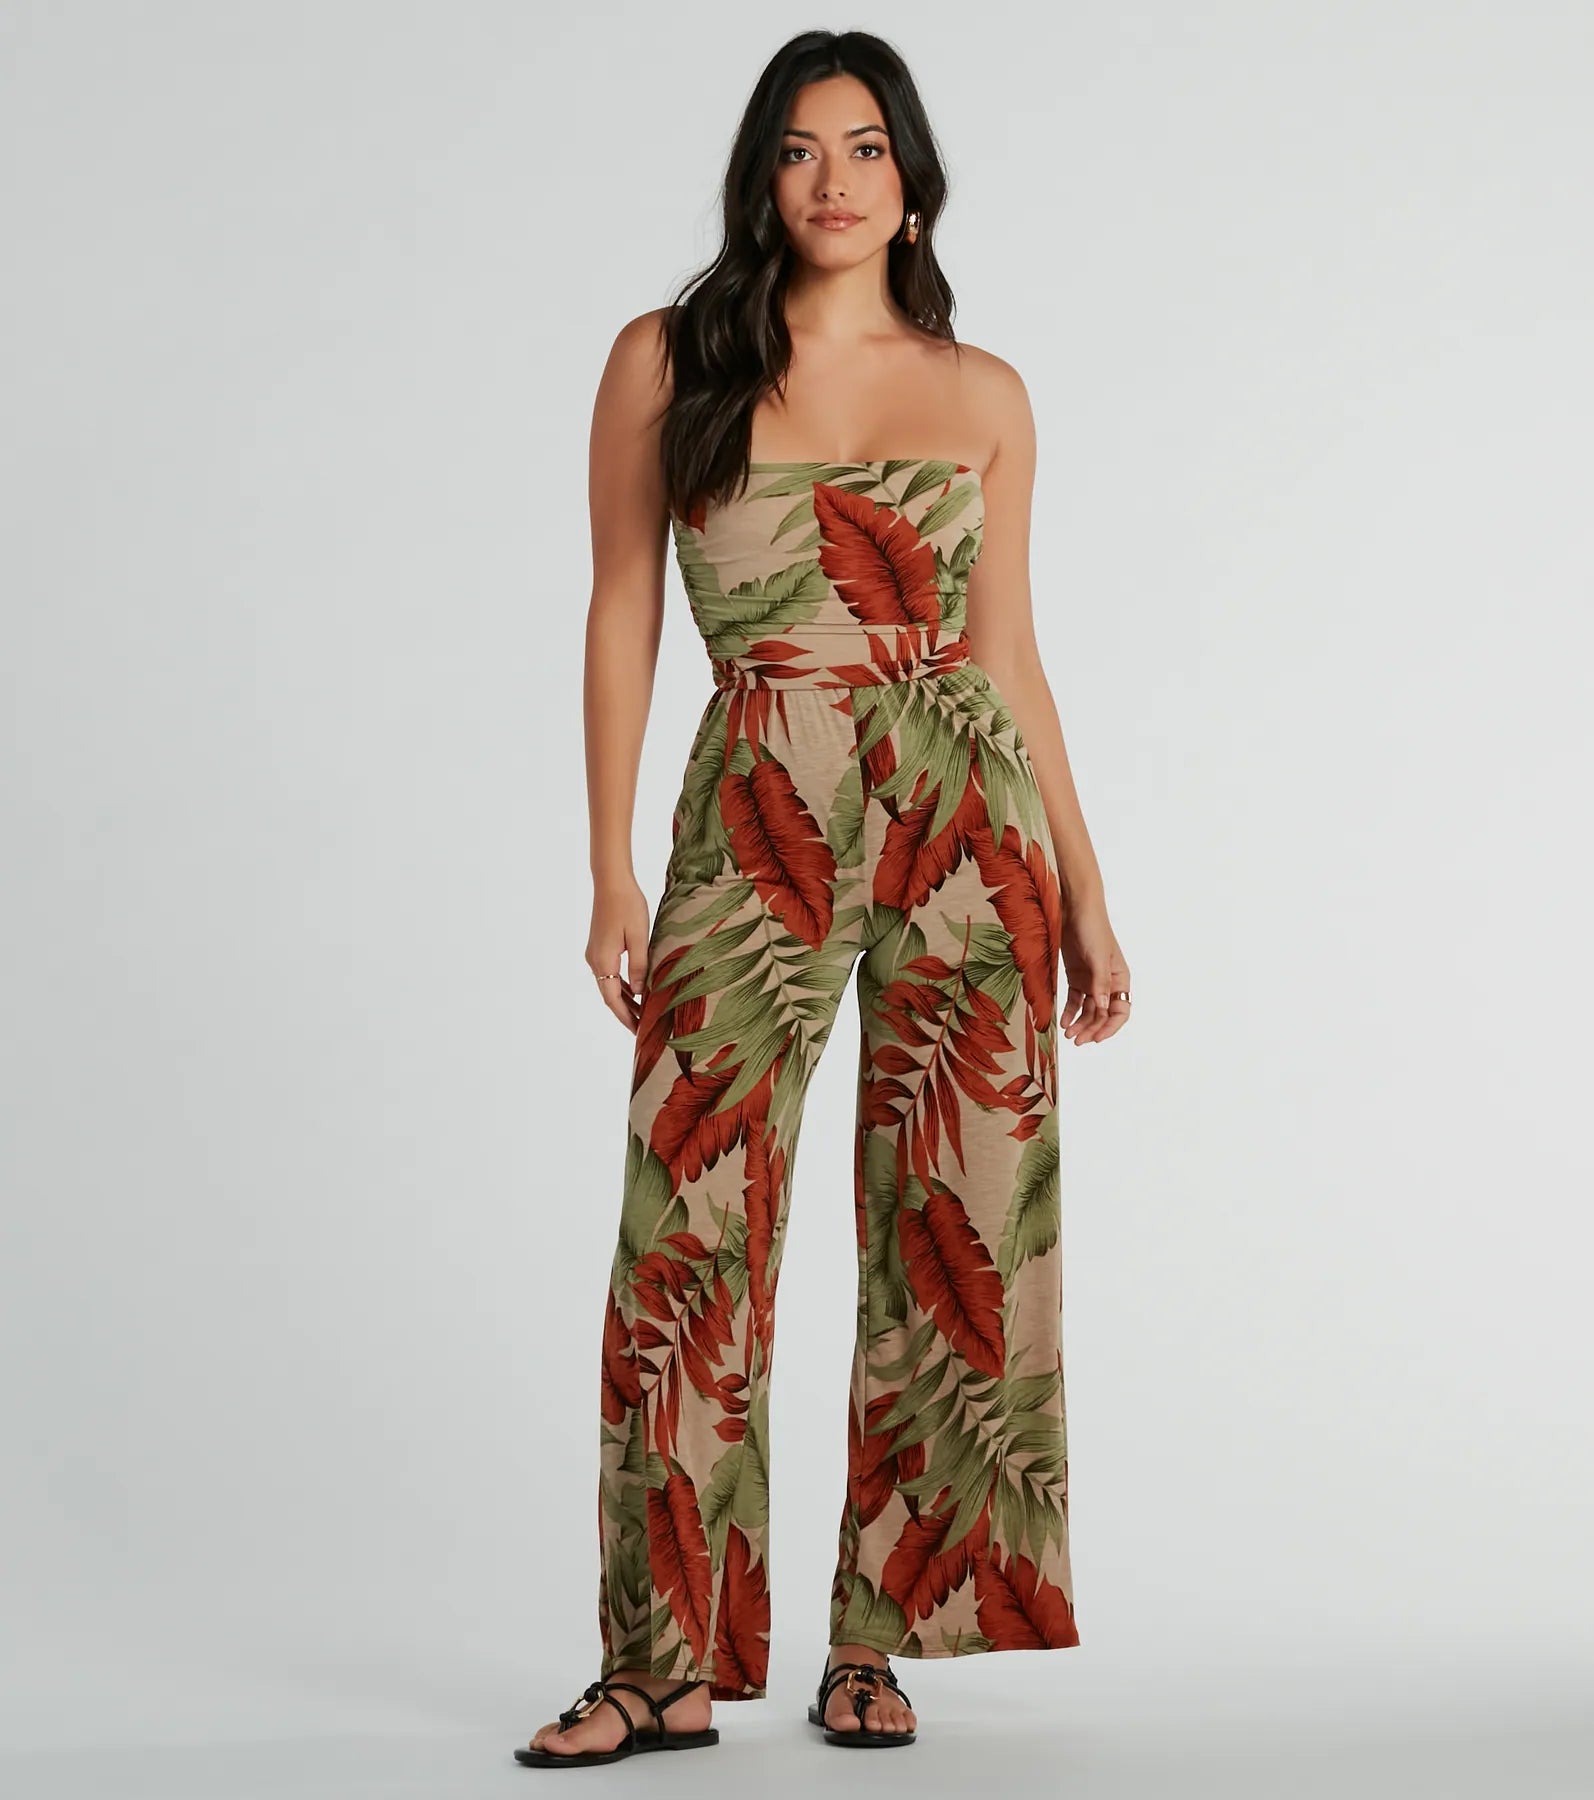 Strapless Straight Neck Tropical Print Knit Stretchy Fitted Beach Dress/Jumpsuit